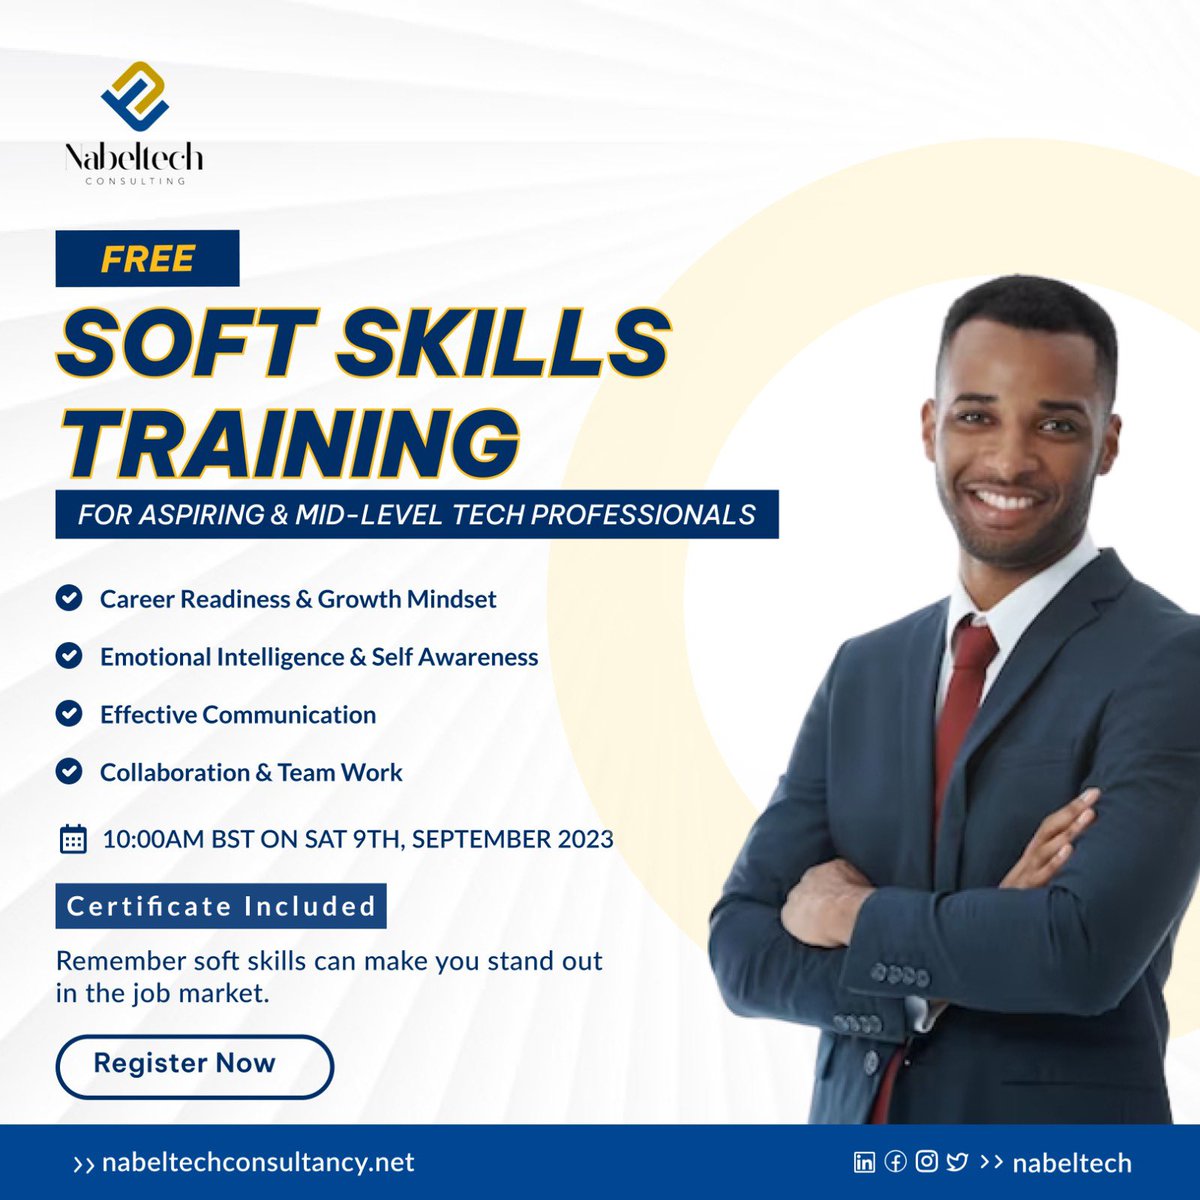 Having soft skills can give you the competitive edge needed to secure a high-paying job and excel in your role. Join us tomorrow for a FREE virtual training and be part of those ready to supercharge their learning and career path Time: 10 am Date: 9th September